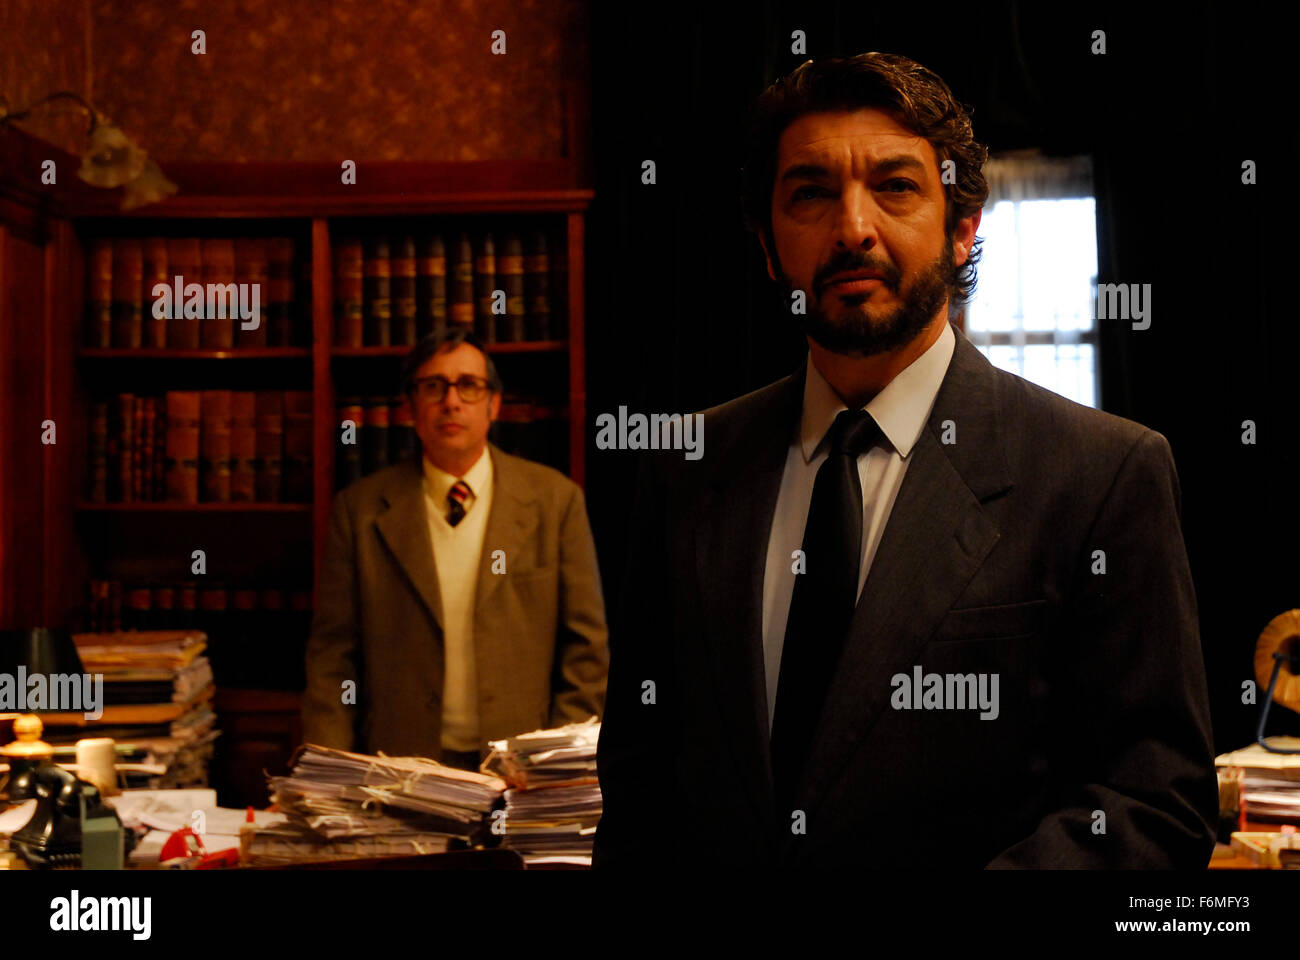 RELEASE DATE: April 11, 2009. MOVIE TITLE: The Secret in their Eyes. STUDIO: 100 Bares. PLOT: A man wants to solve a murder committed many years ago. PICTURED: GUILLERMO FRANCELLA as Sandoval, RICARDO DARIN as Benajmin Esposito. Stock Photo